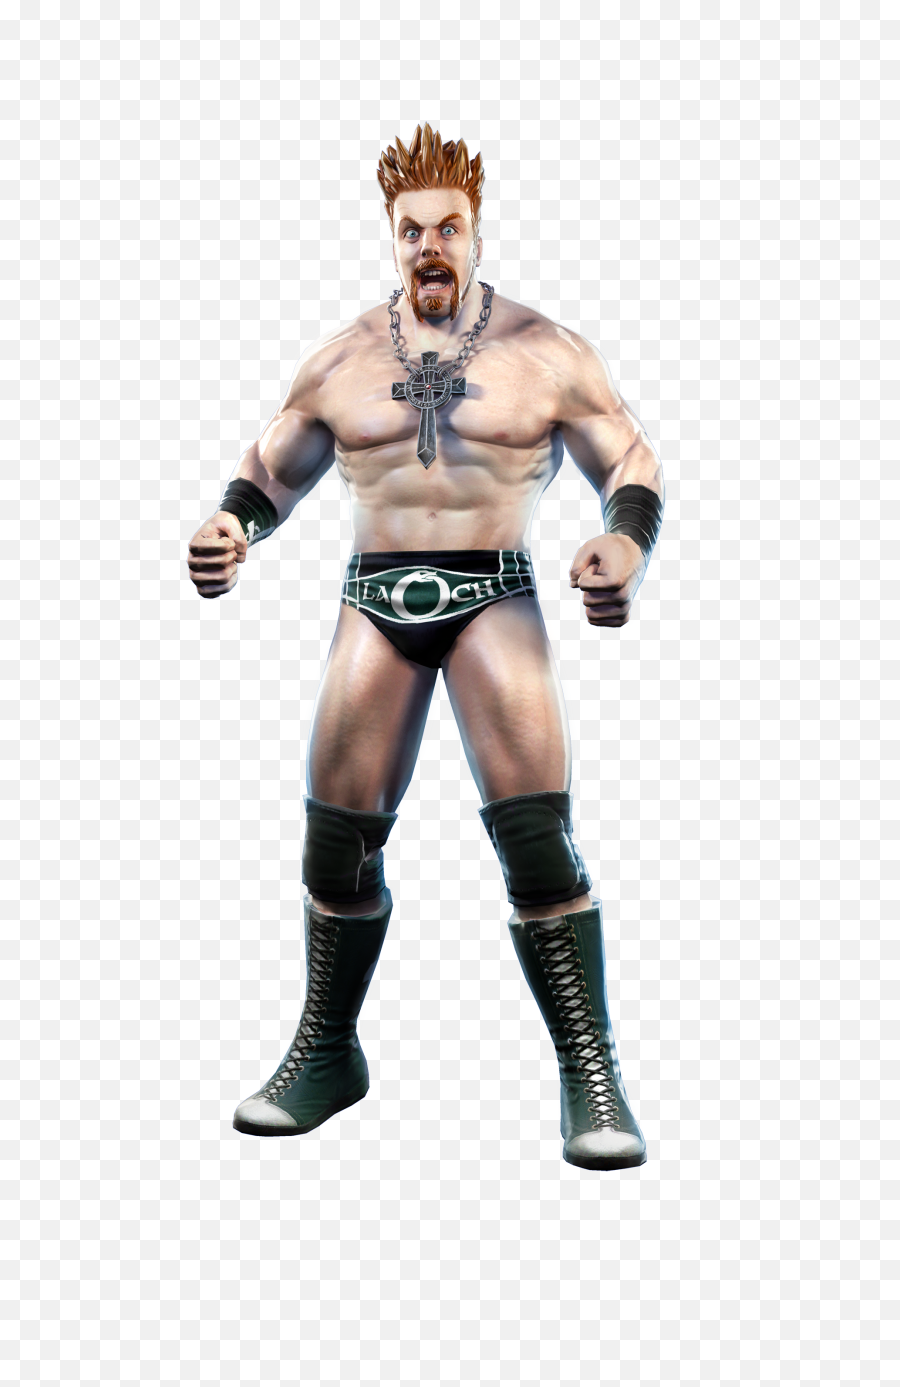 Wwe All Stars Sheamus Png Image With No - Sheamus Wwe All Stars,Sheamus Png